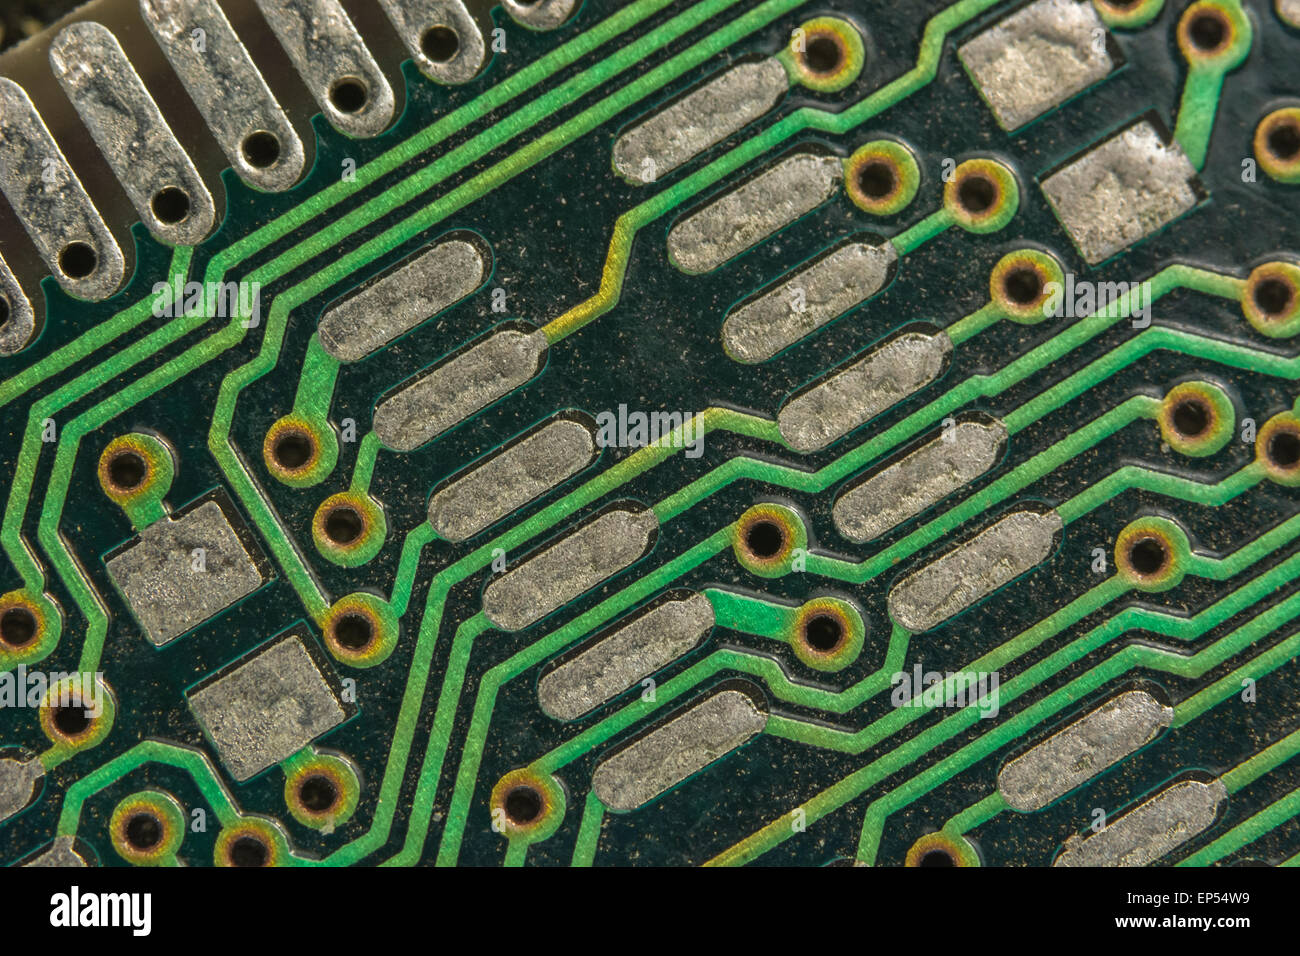 Macro-photo of the contacts and solder points of a piece of PCB associated with PC memory sticks. Wiring inside computer. Stock Photo